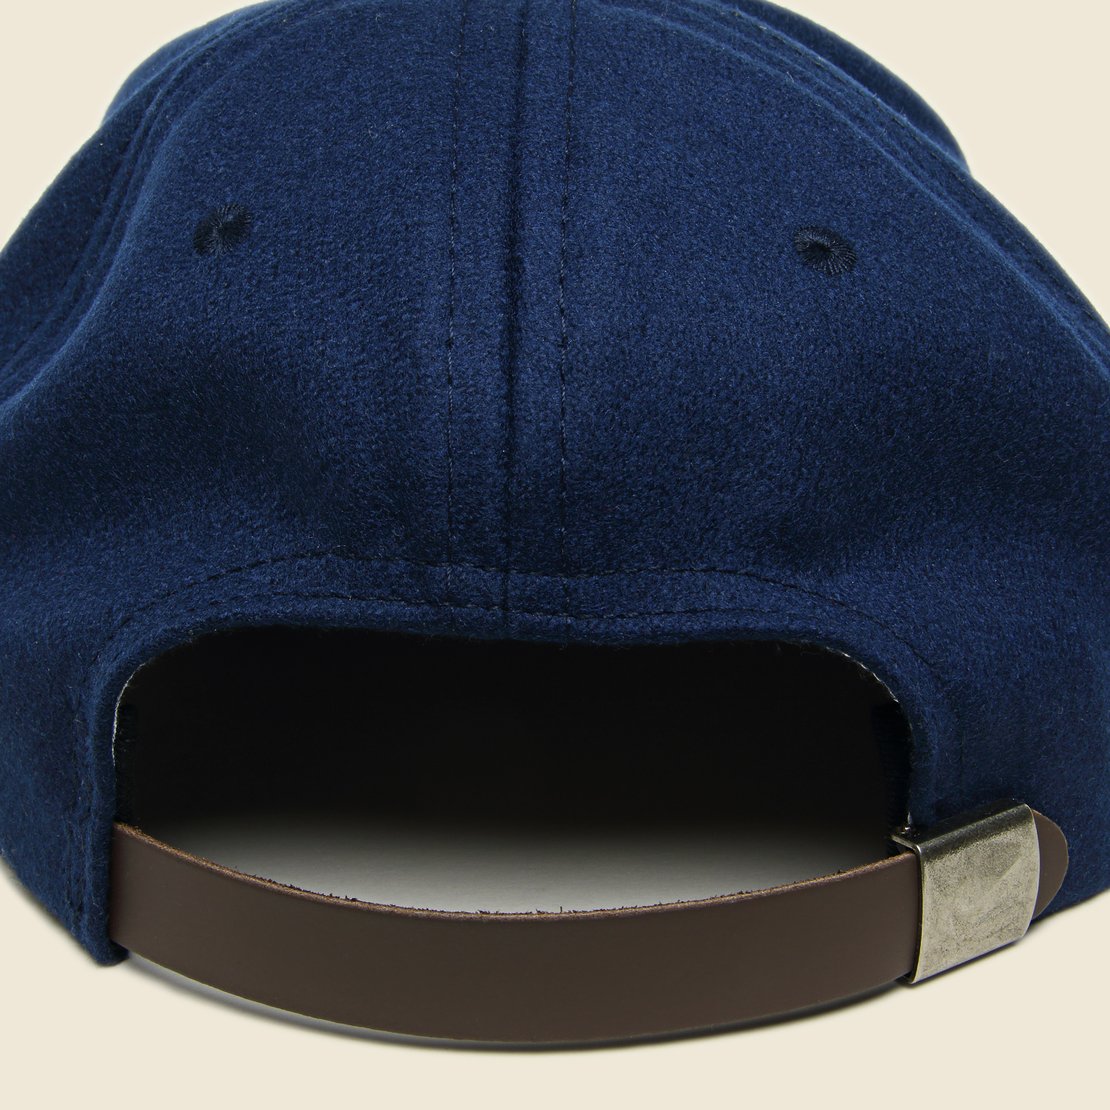 Houston Buffaloes Wool Hat - Navy - Ebbets Field Flannels - STAG Provisions - Accessories - Hats